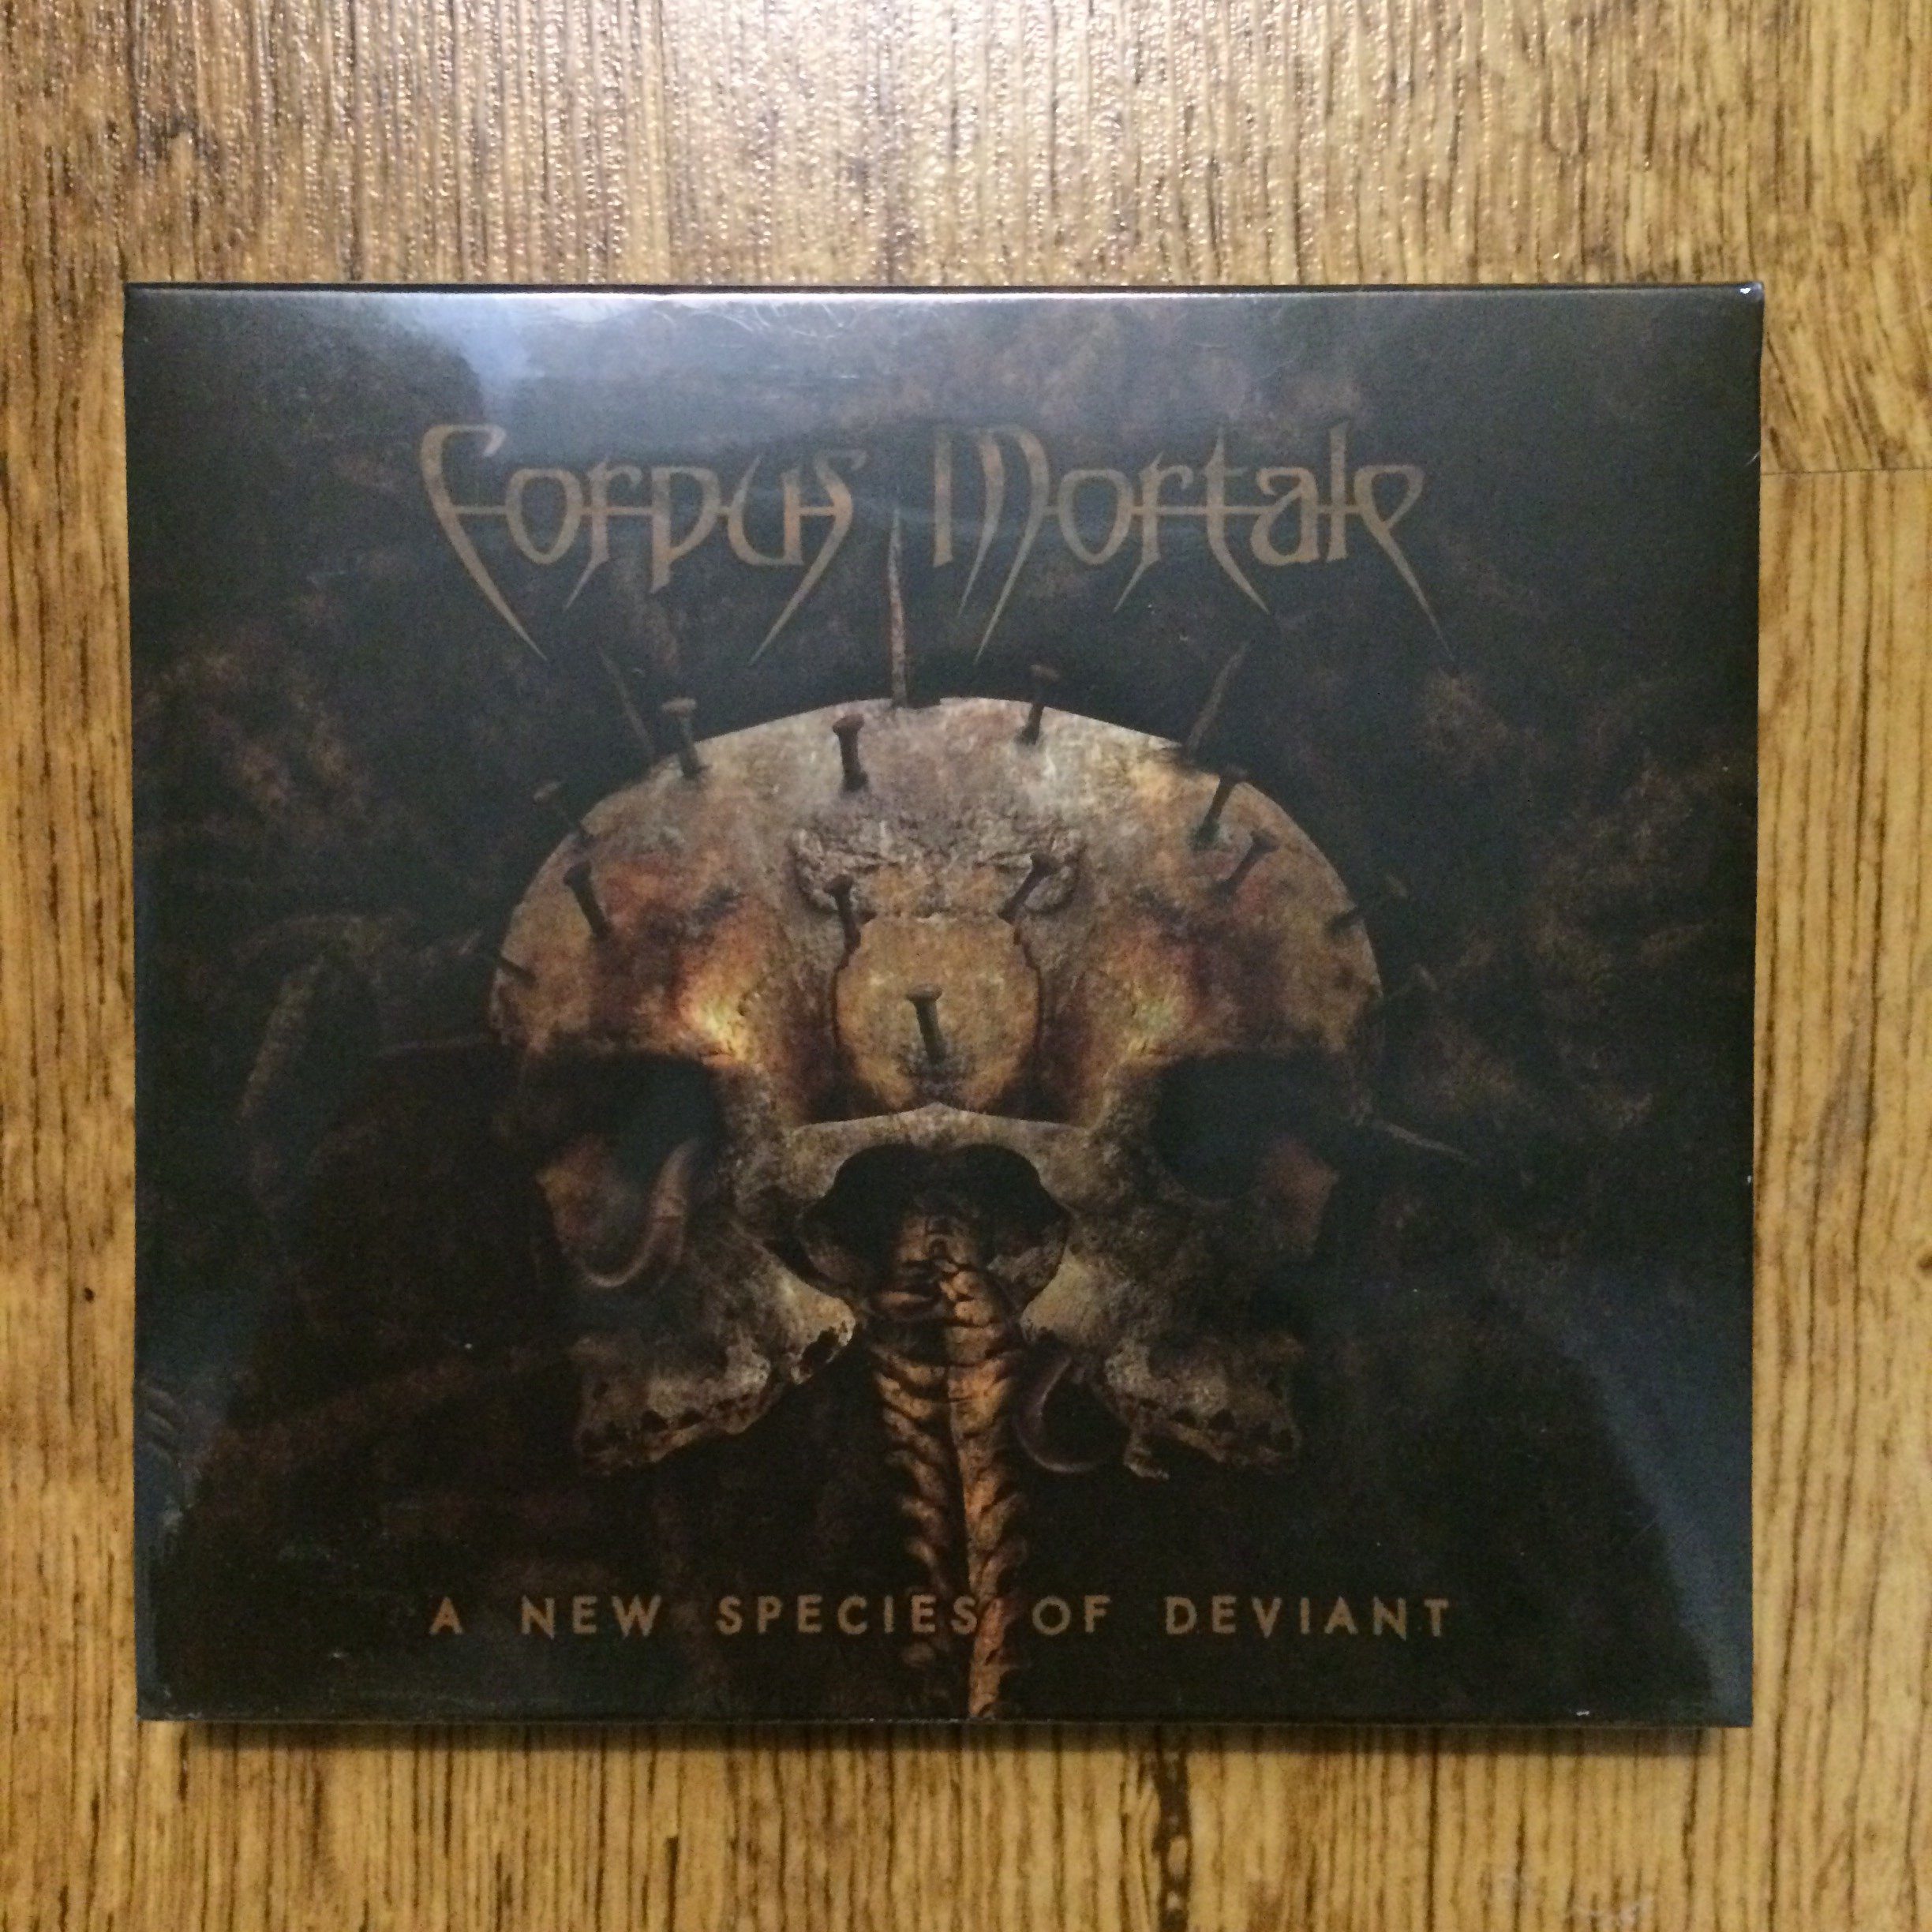 Photo of the Corpus Mortale - "A New Species of Deviant" CD